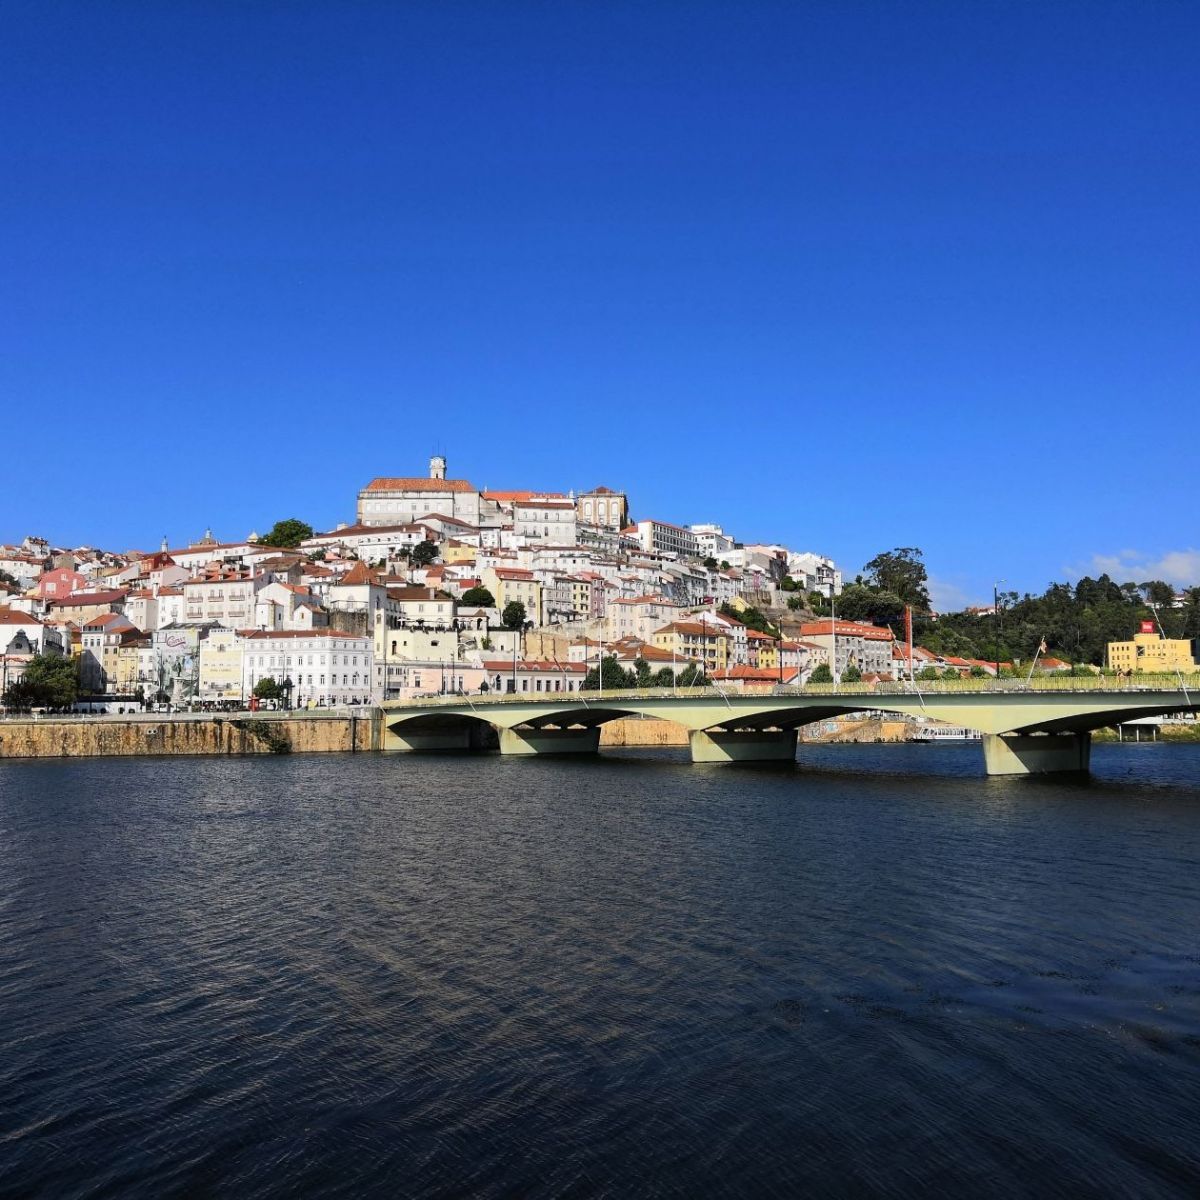 Coimbra is home to some of the cheapest house prices in Portugal.